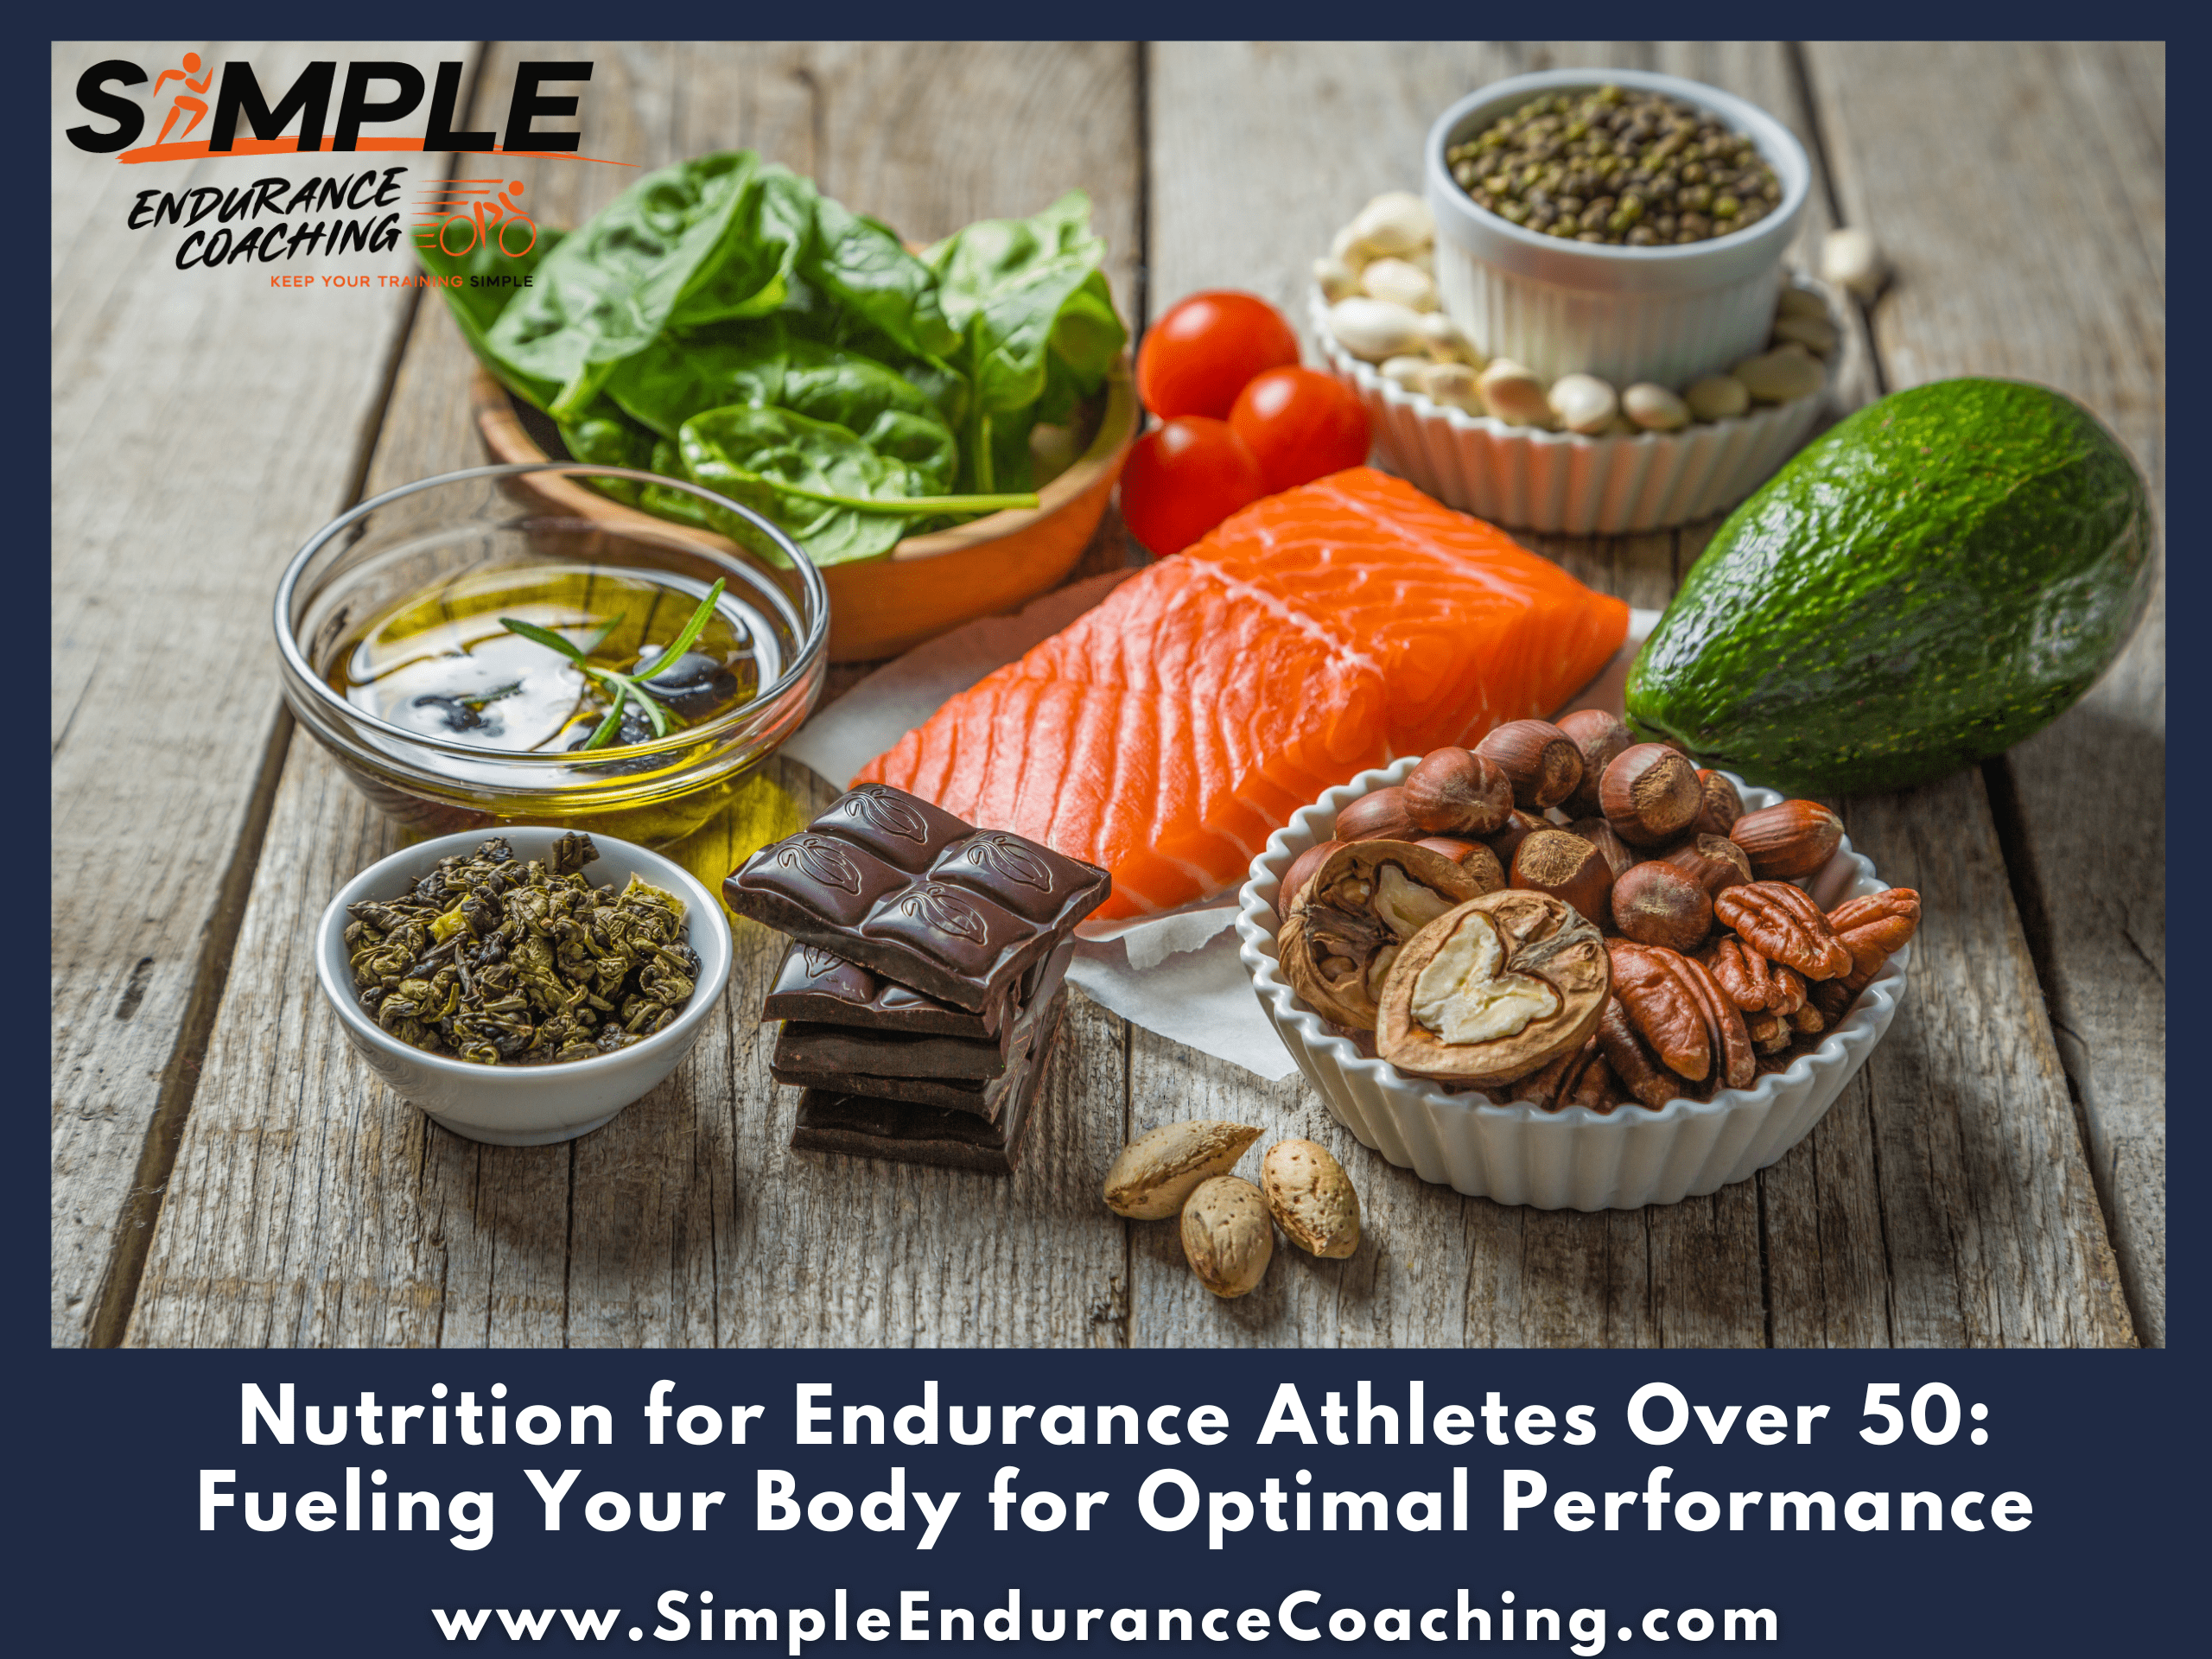 Discover essential nutrition tips for athletes over 50 in our blog. Learn how to fuel your body for endurance sports with tailored protein, carbs, and hydration strategies.